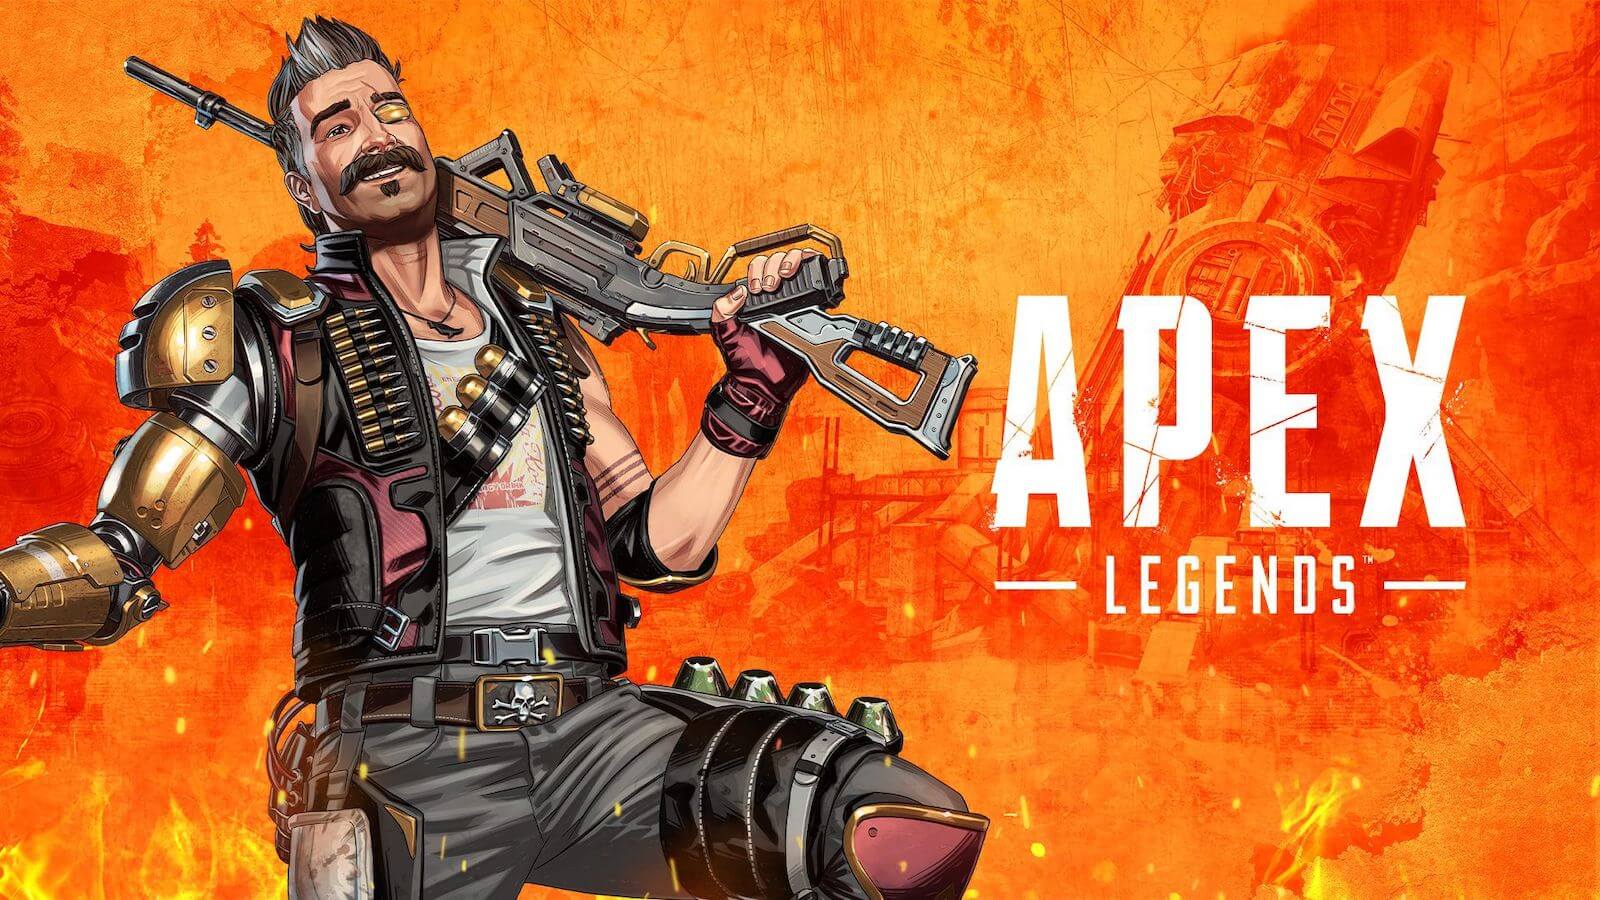 It is said that the next 9 legends of Apex Legends and the new battle royale map have been leaked!